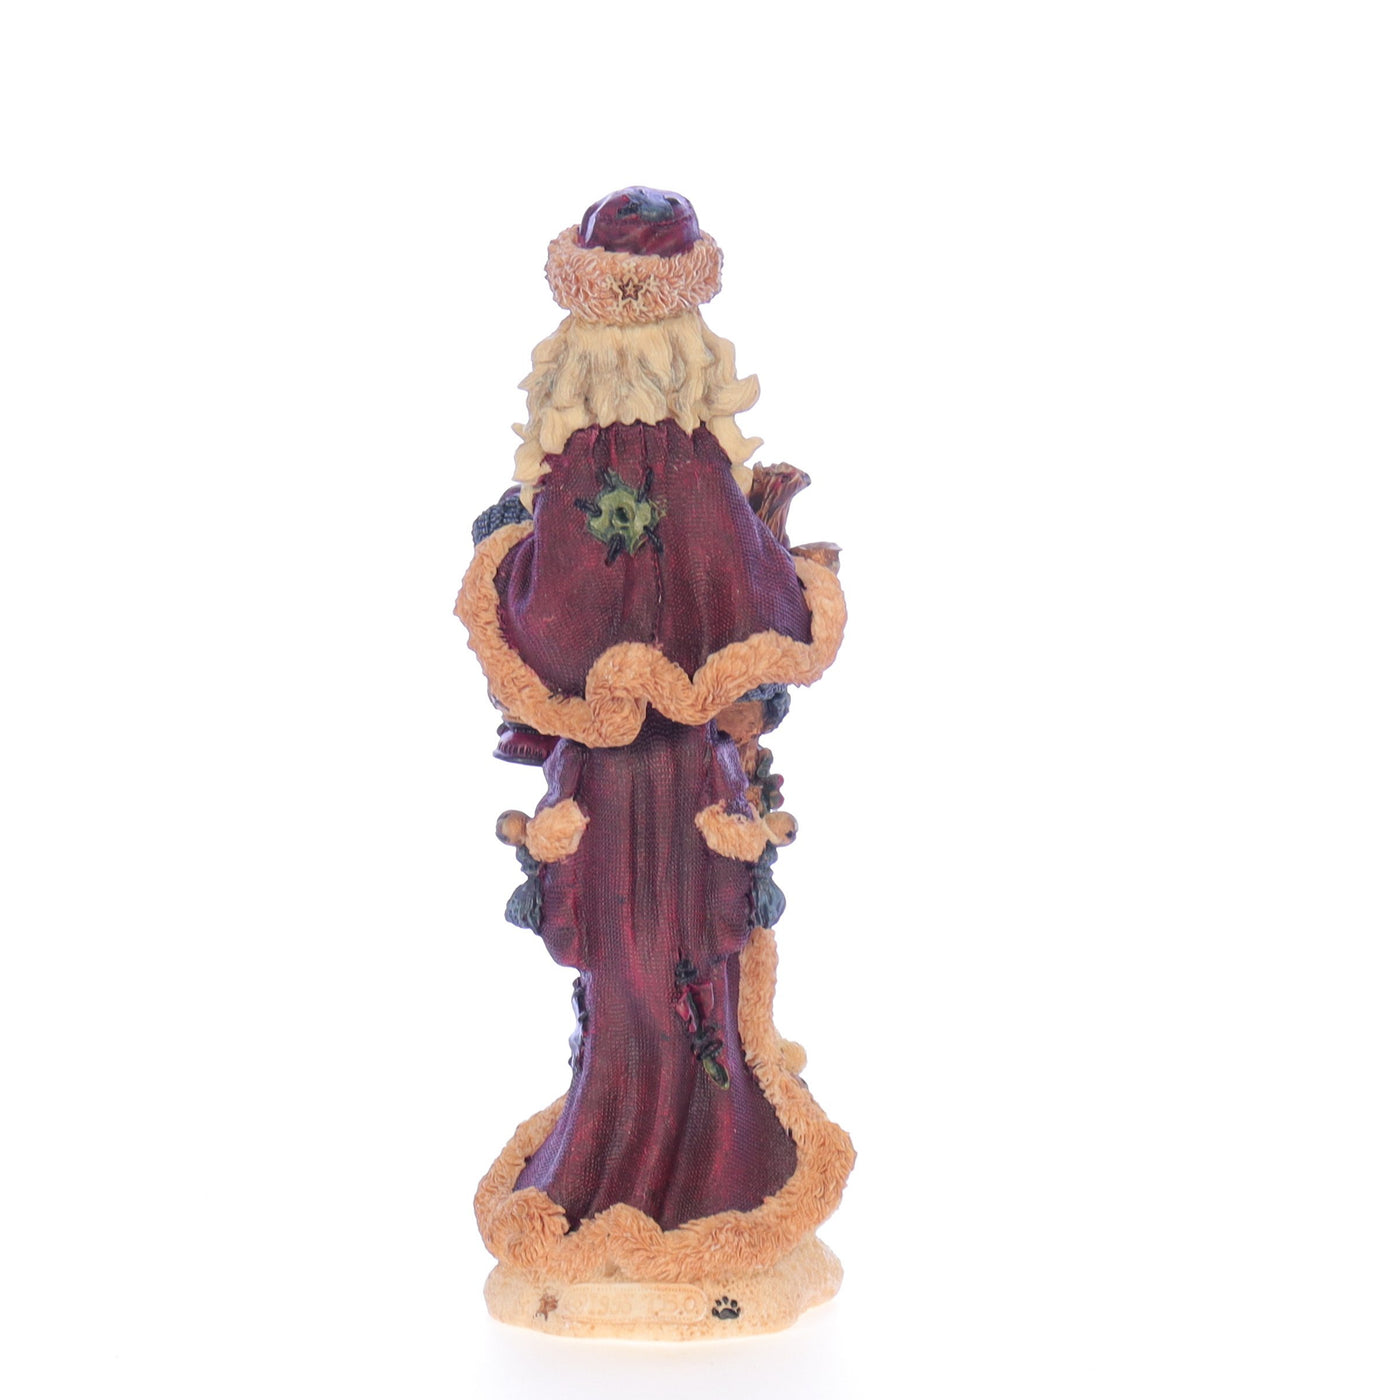 Boyds_Bears_Folkstone_Resin_Figurine_St_Nick_The_Quest_2808_05